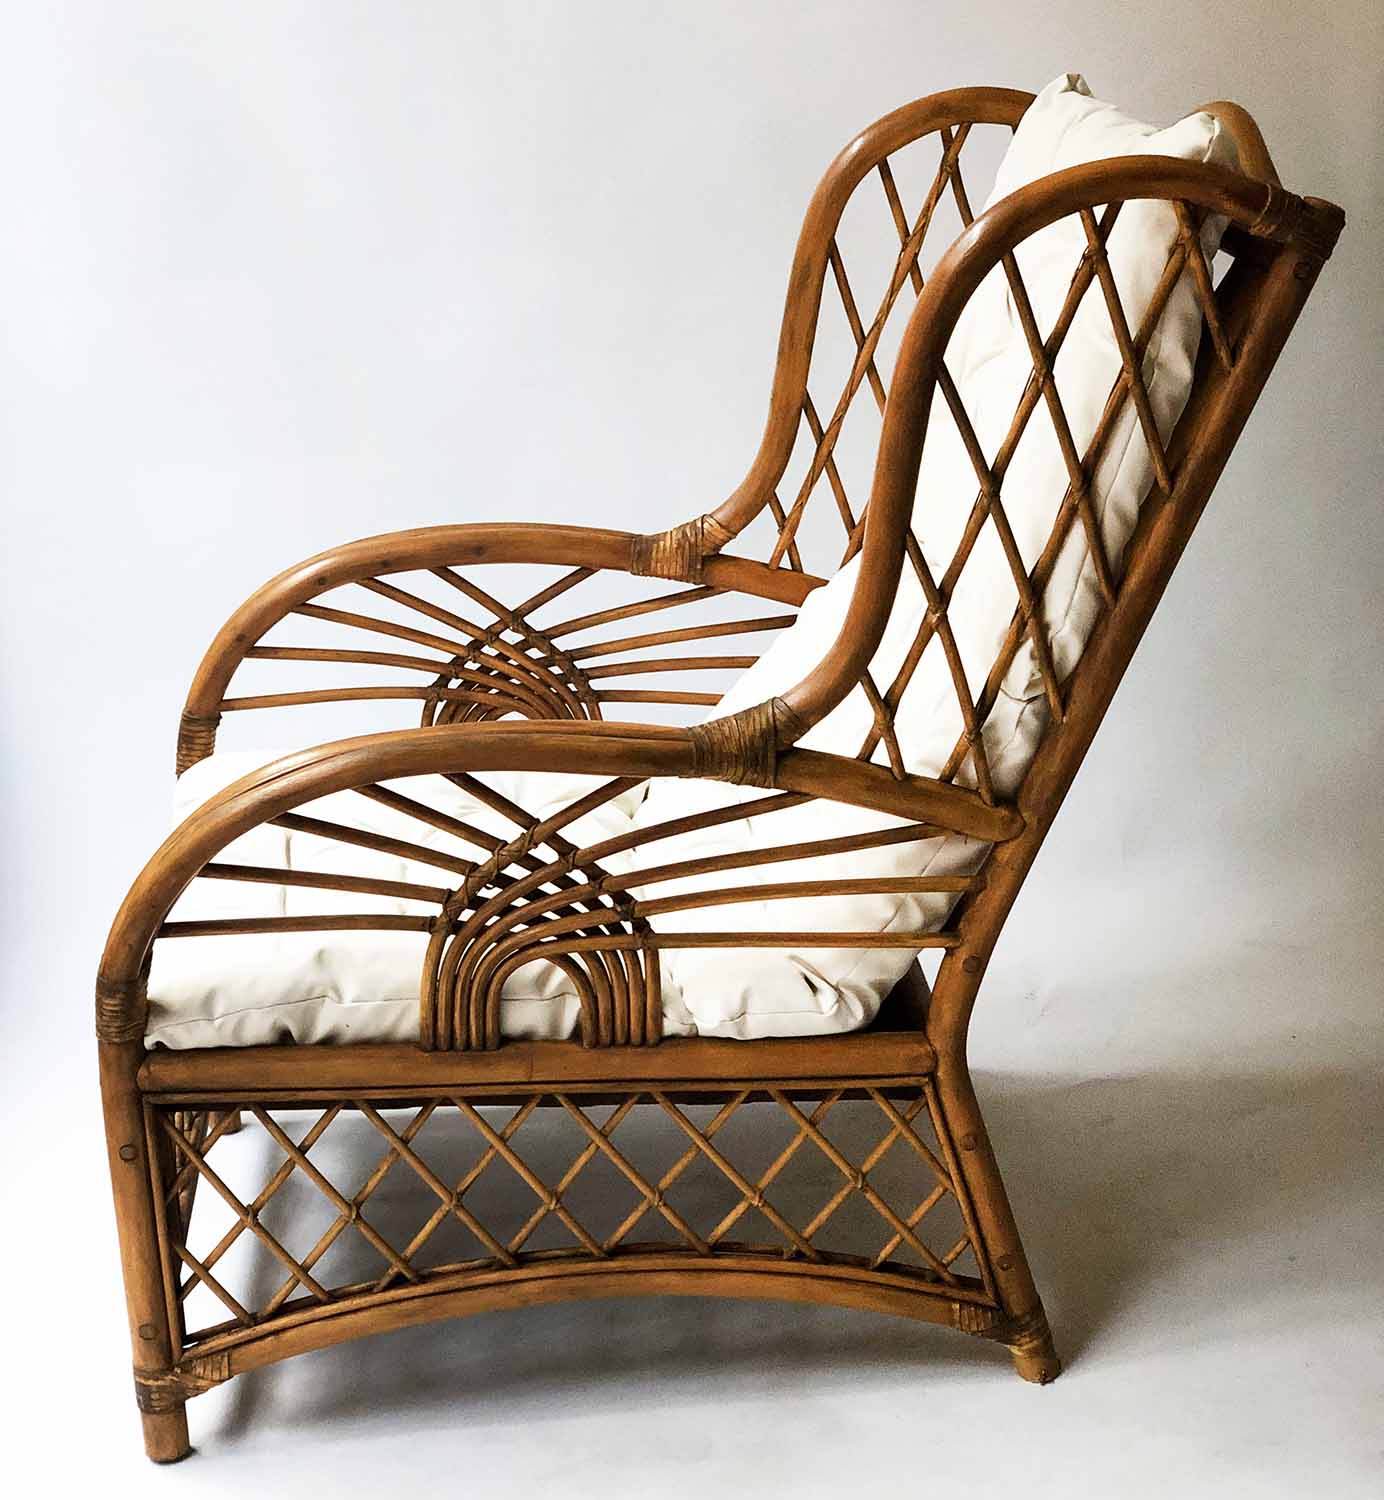 RATTAN ARMCHAIR, vintage 1930's inspired bent and woven rattan with cushion pads, 67cm W. - Image 2 of 3